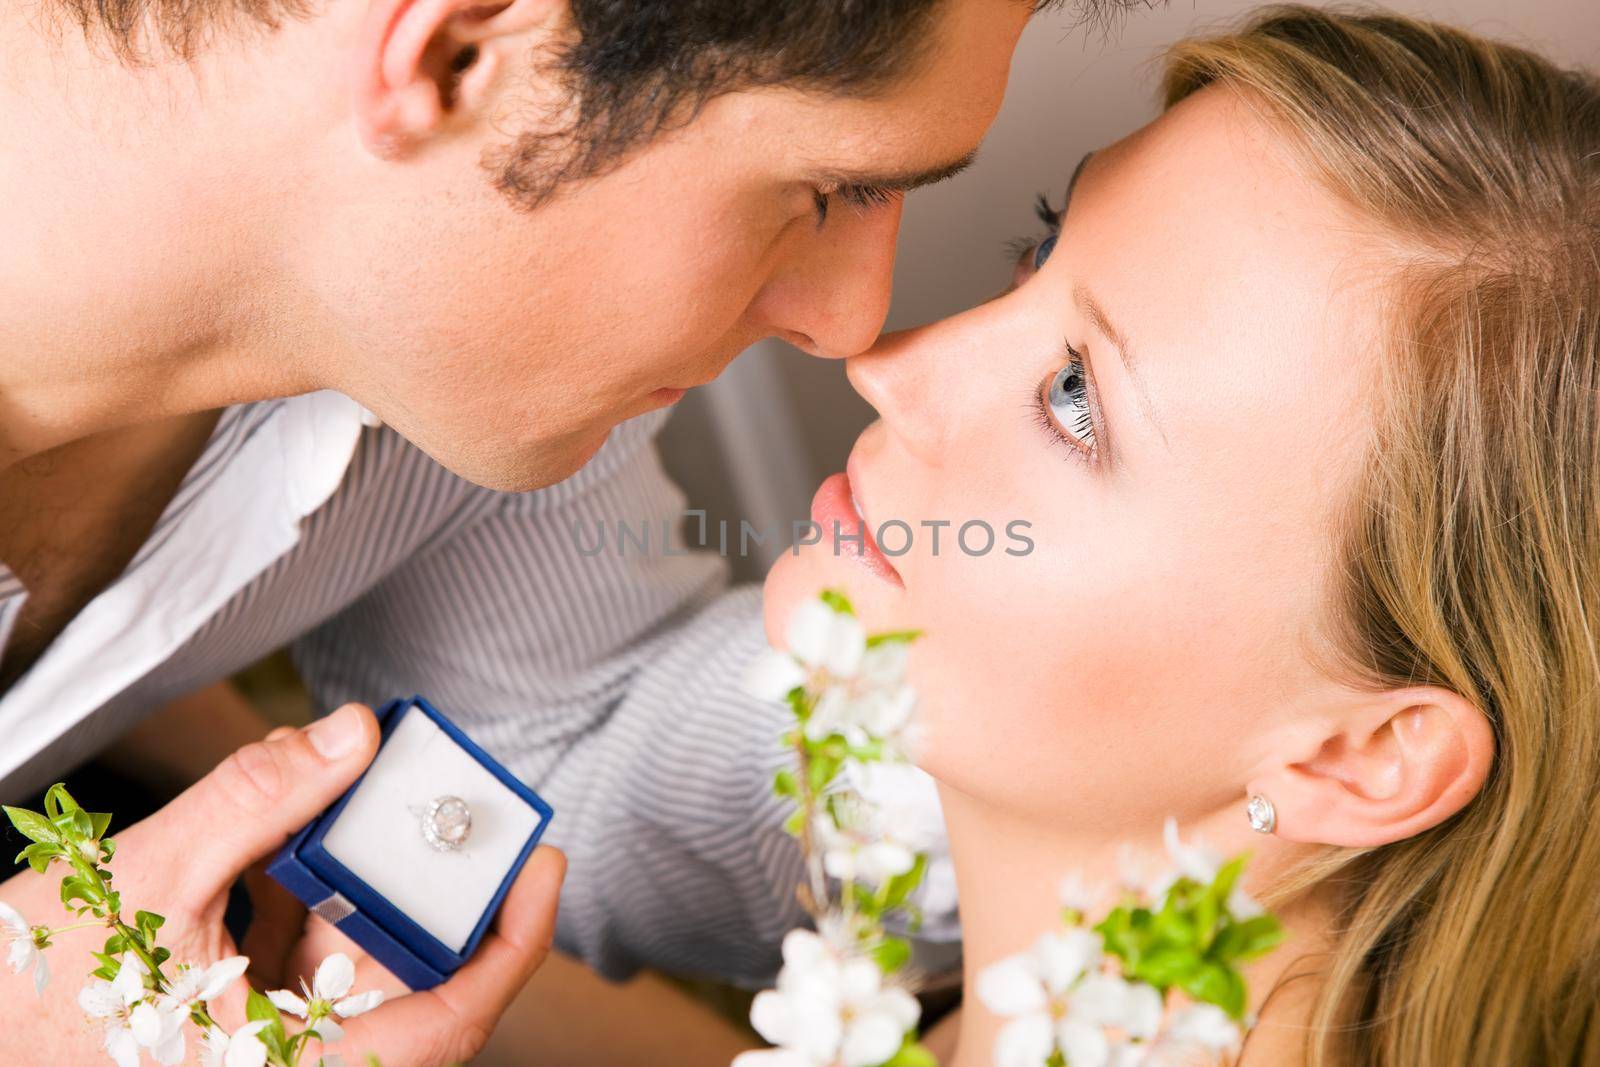 He is proposing, she looks as if she is considering a yes; focus on eyes